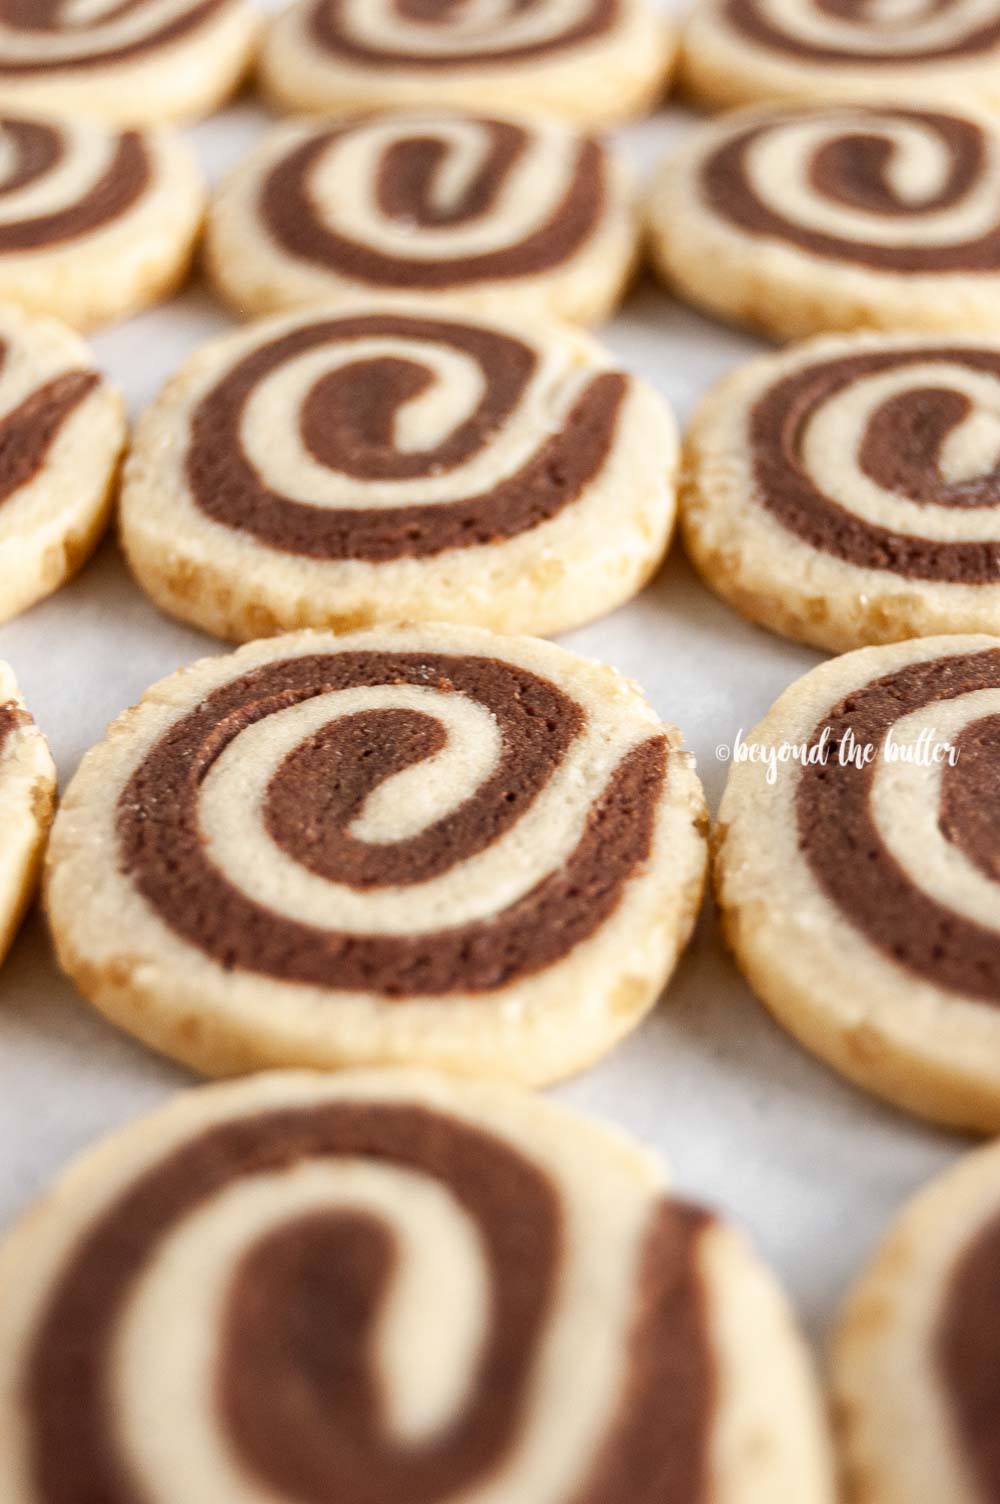 Angled image of Chocolate Pinwheel Cookies in rows | All images © Beyond the Butter™